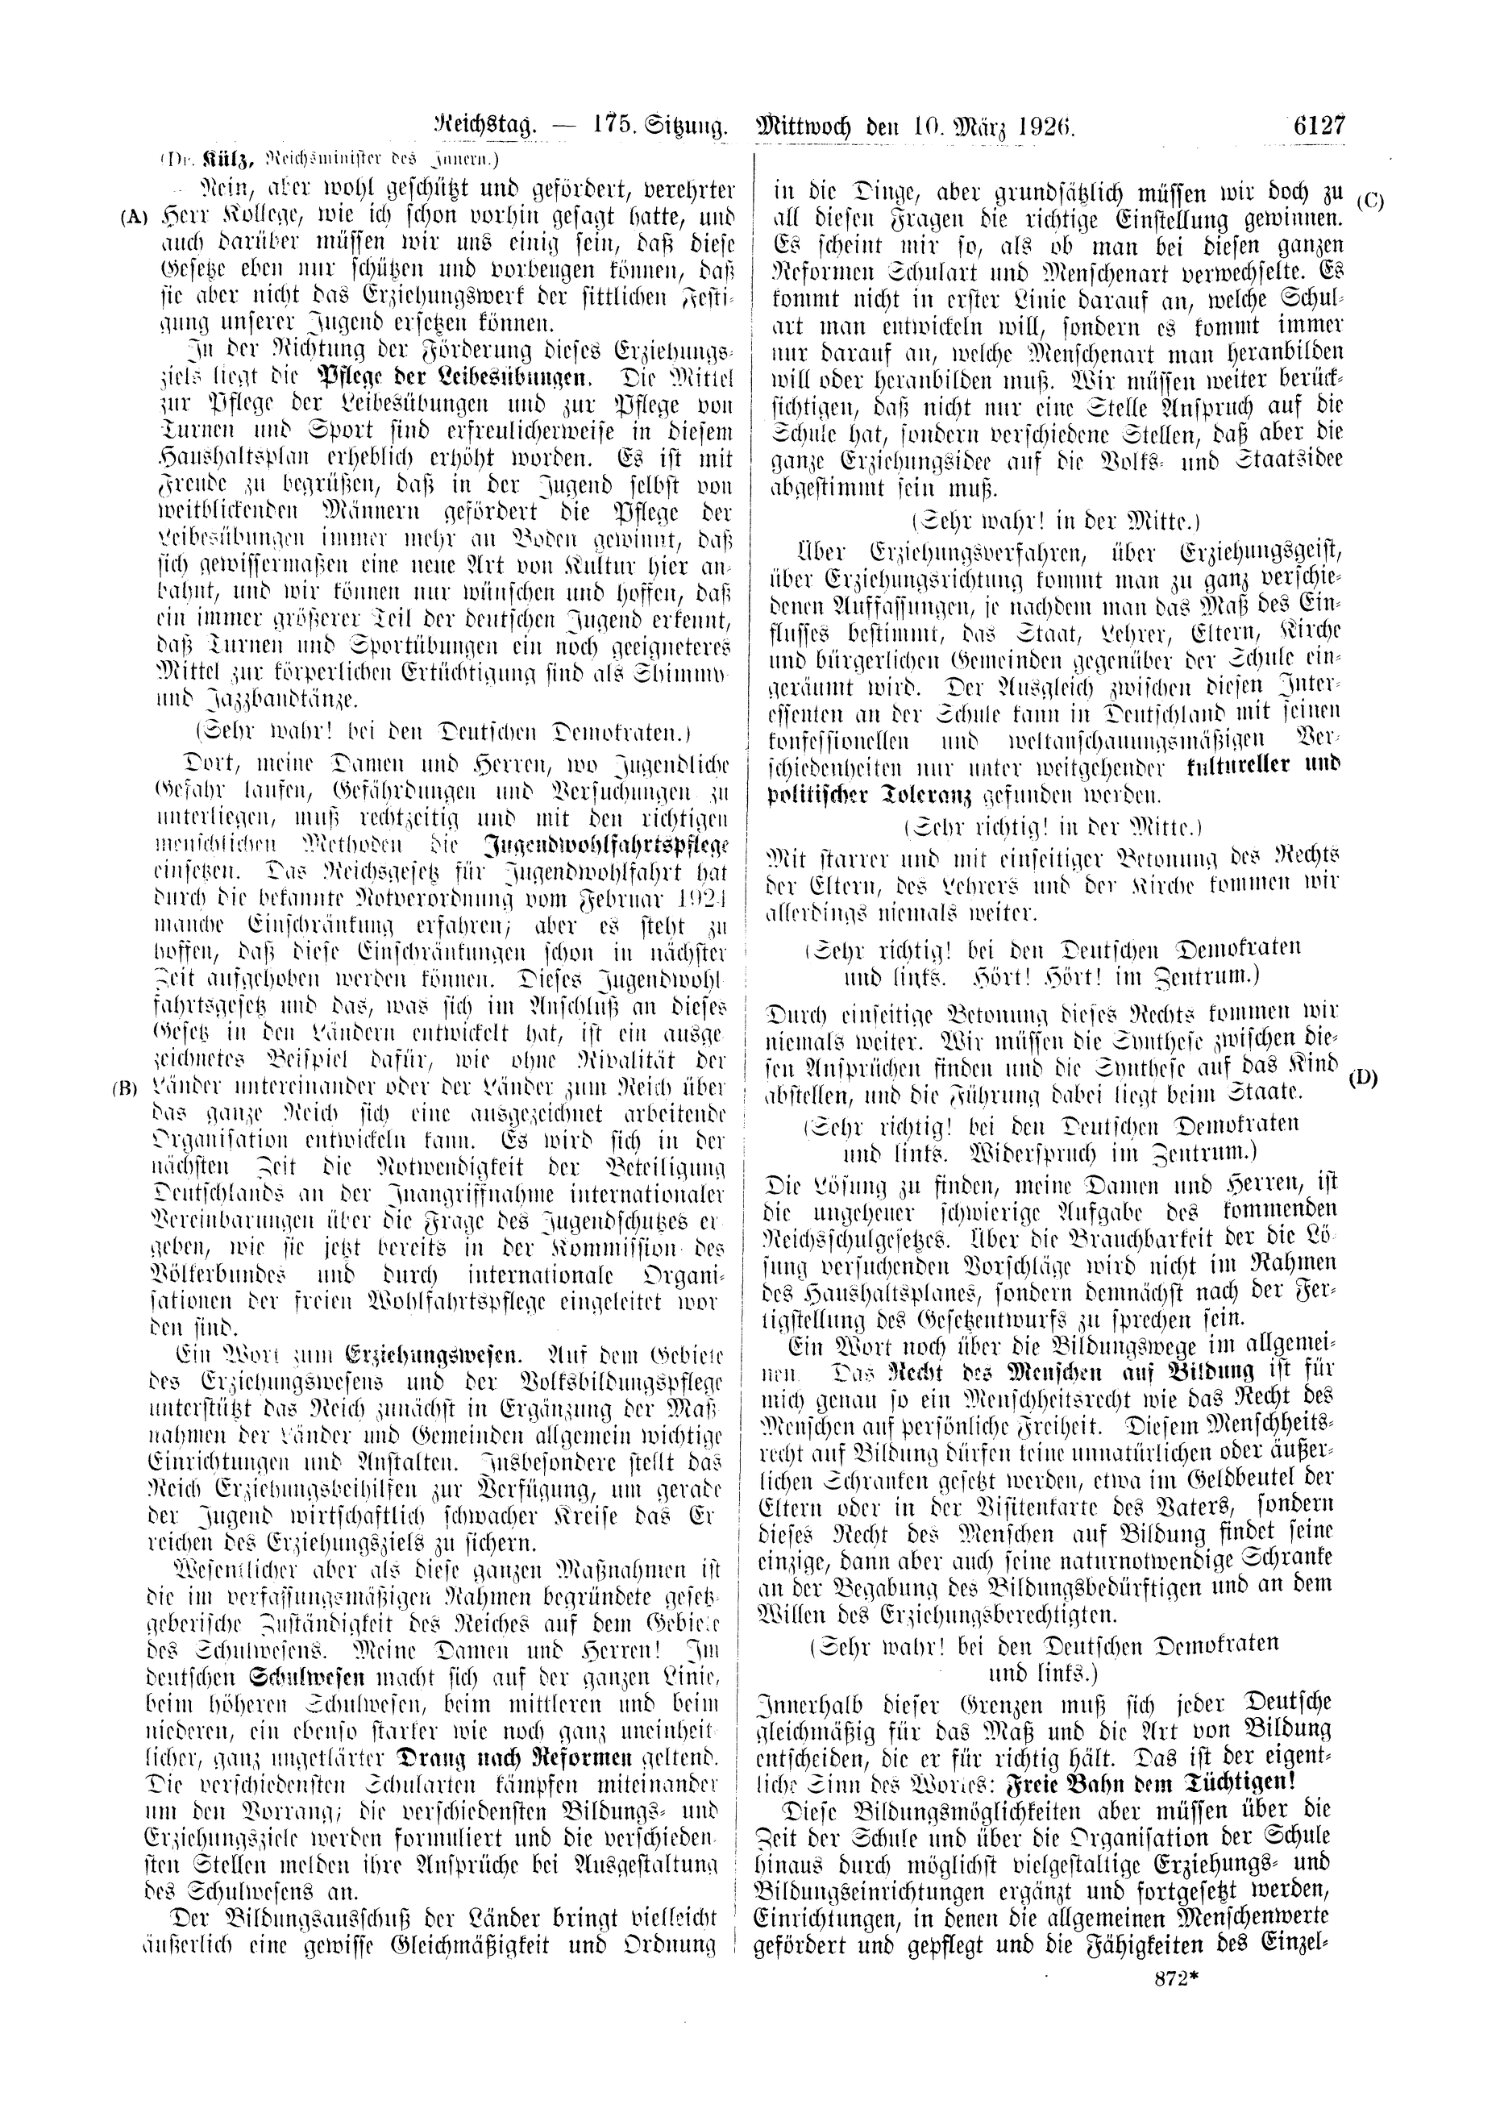 Scan of page 6127